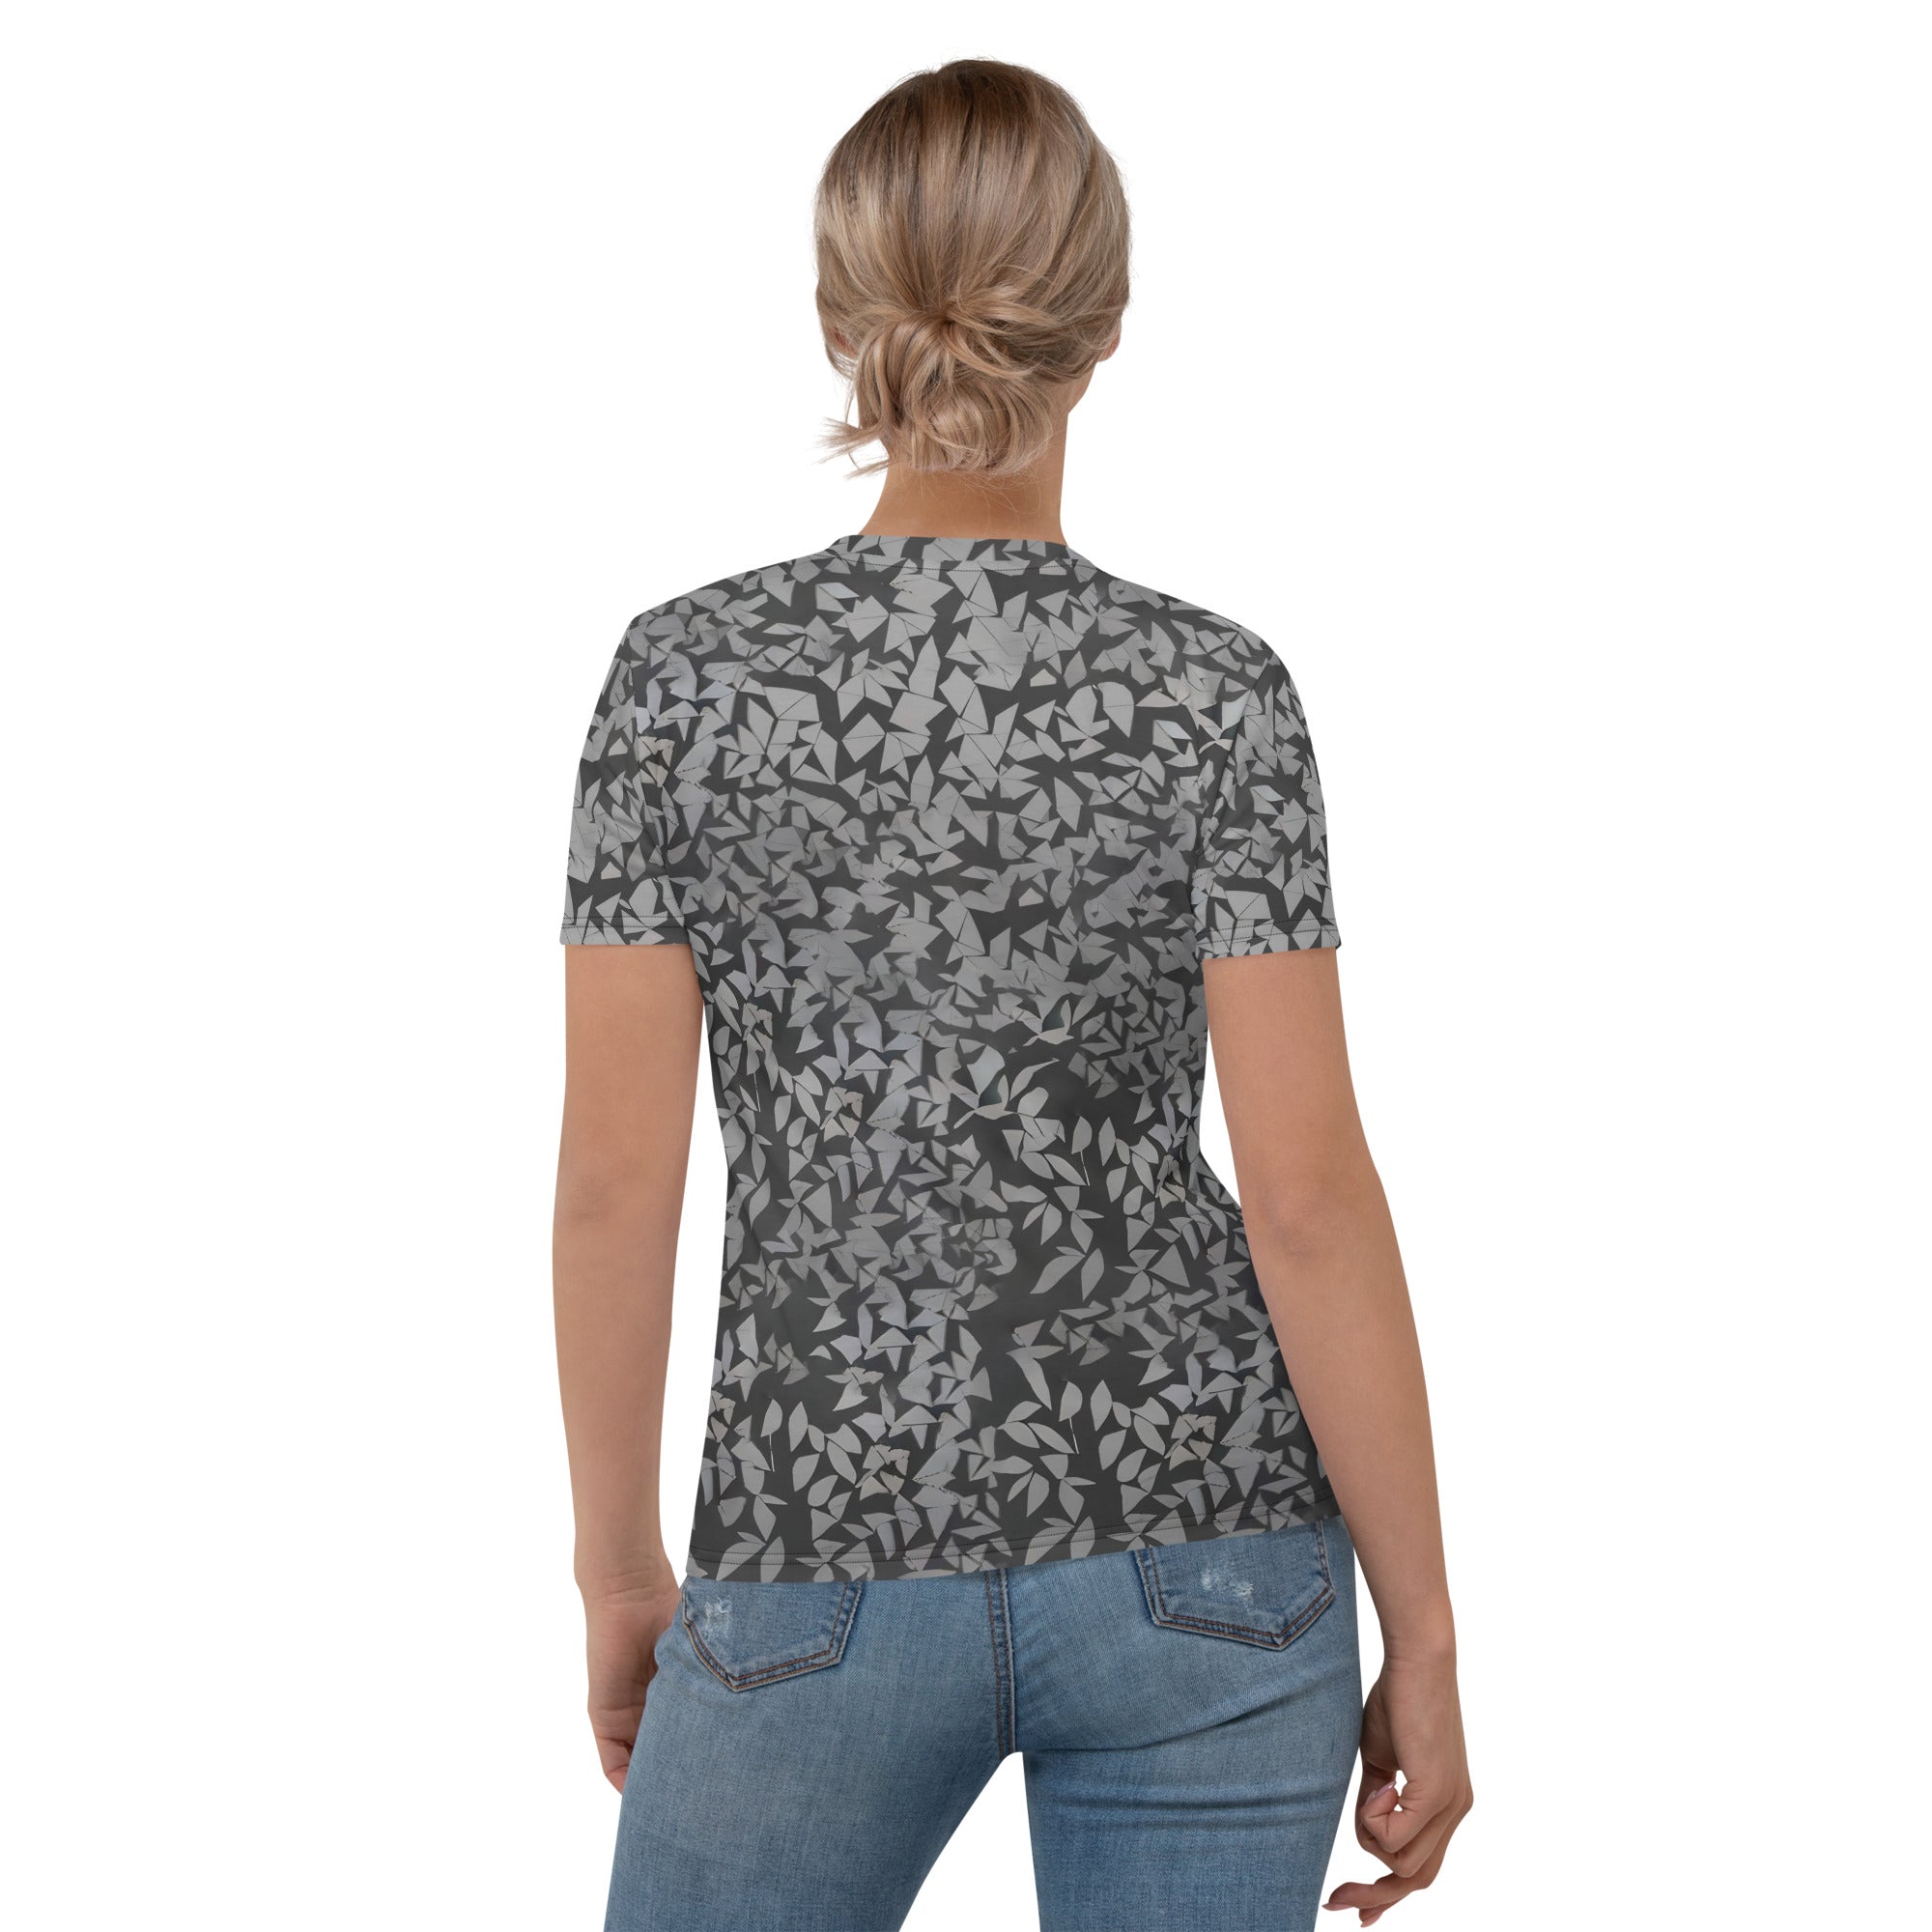 Comfortable and stylish women's crew neck t-shirt in a relaxed fit